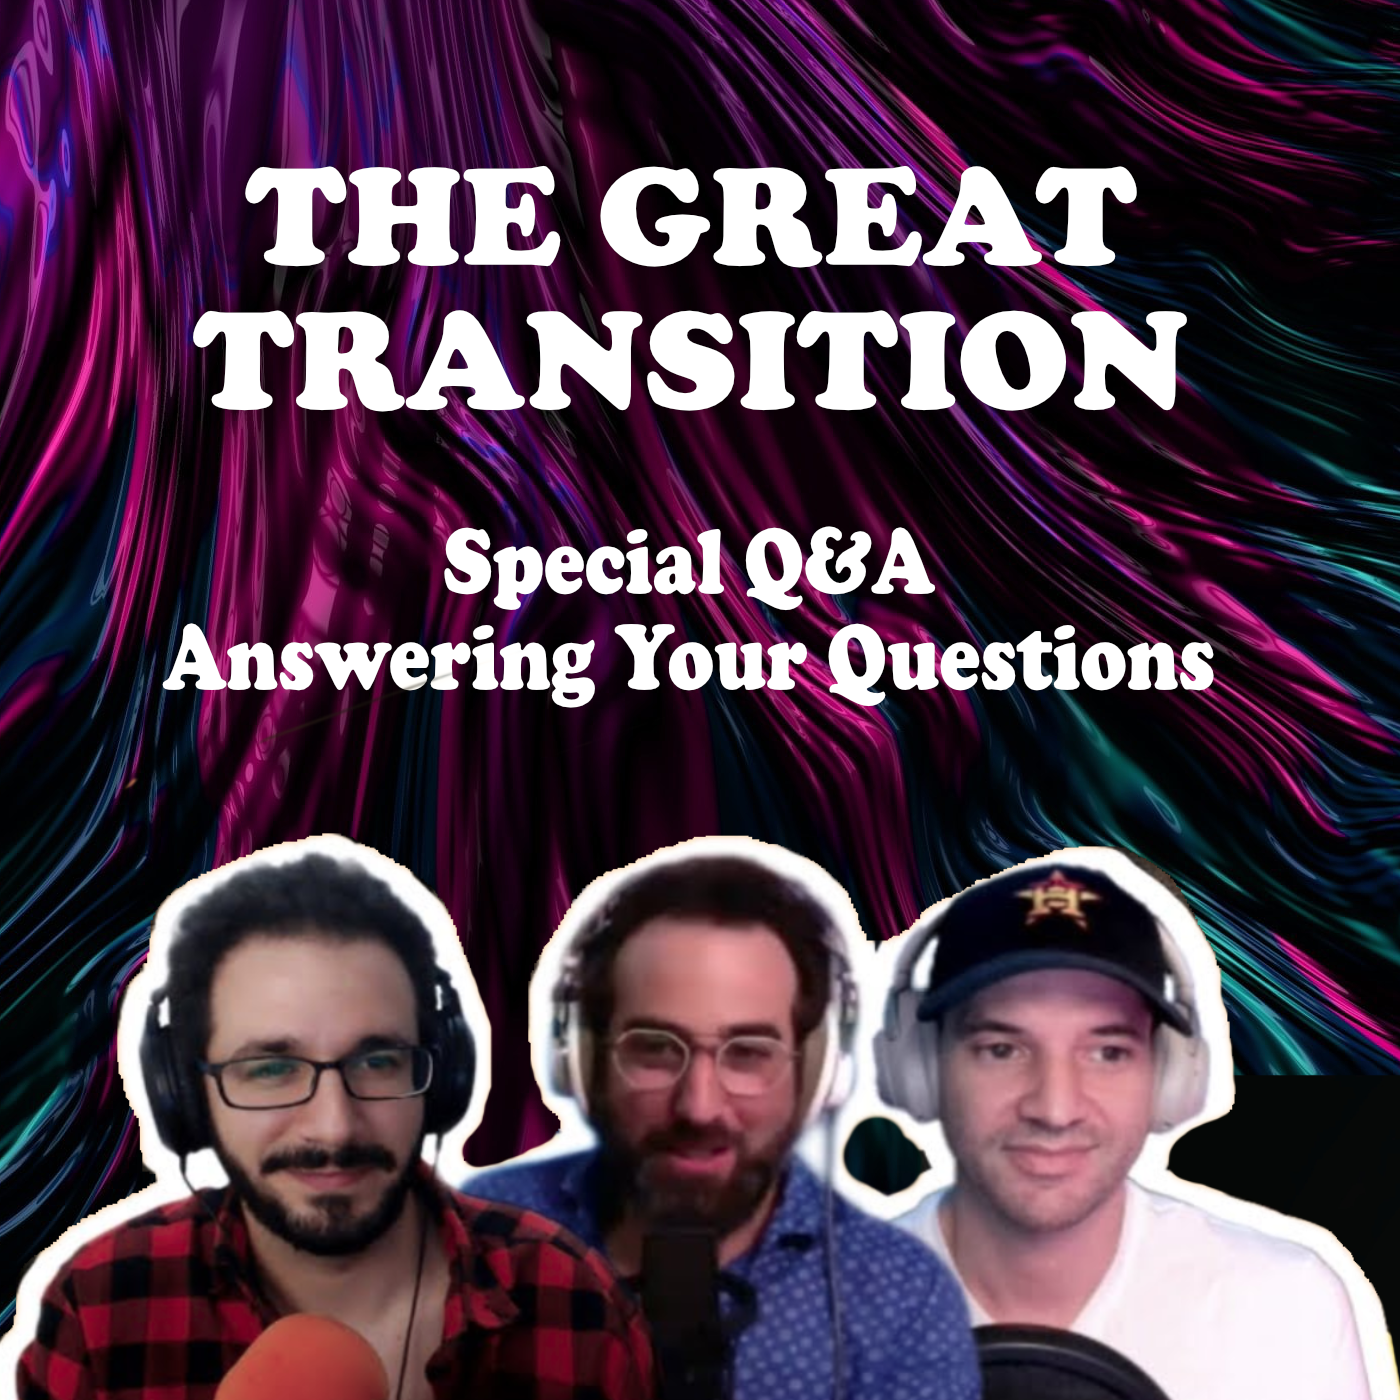 The Great Transition - Special Q&A -Answering Your Questions